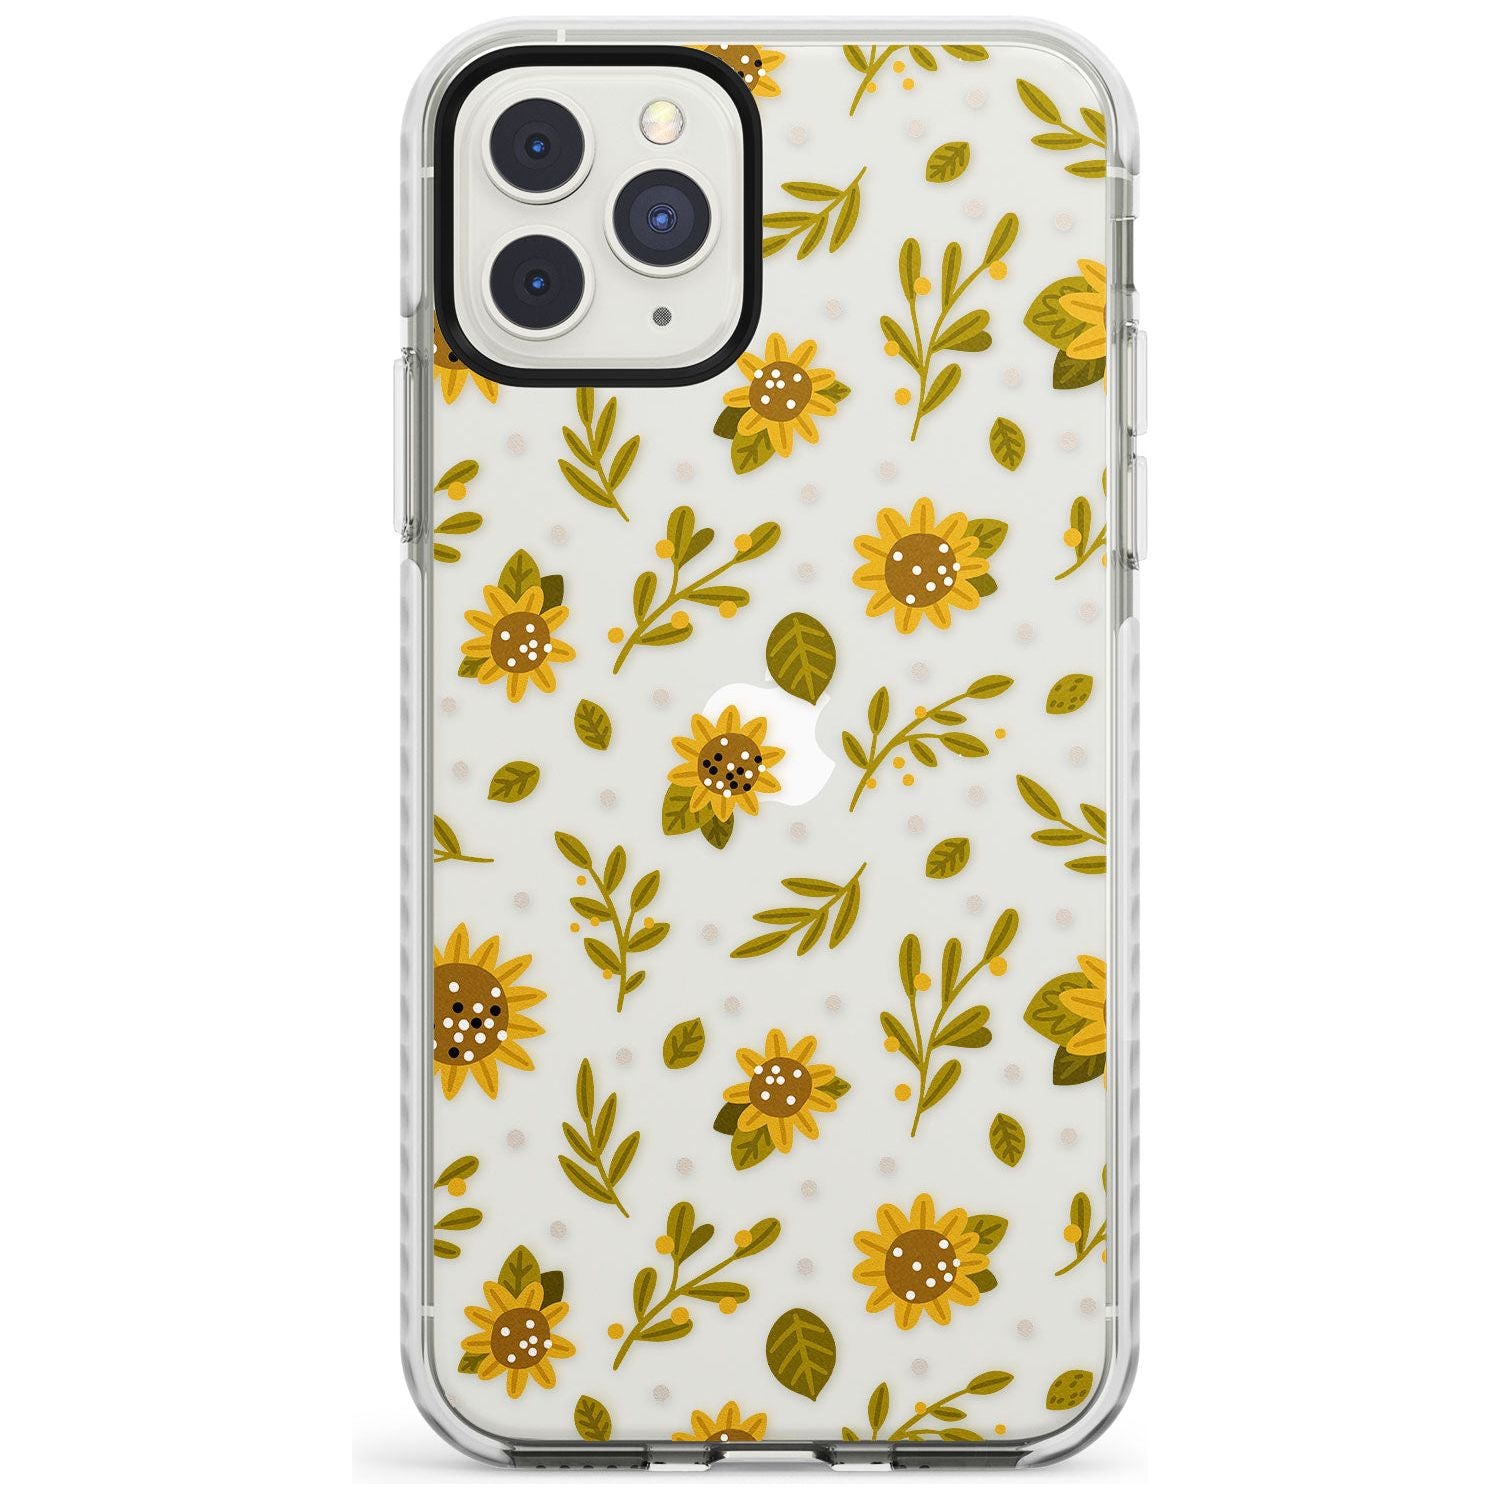 Sweet as Honey Patterns: Sunflowers (Clear) Impact Phone Case for iPhone 11 Pro Max